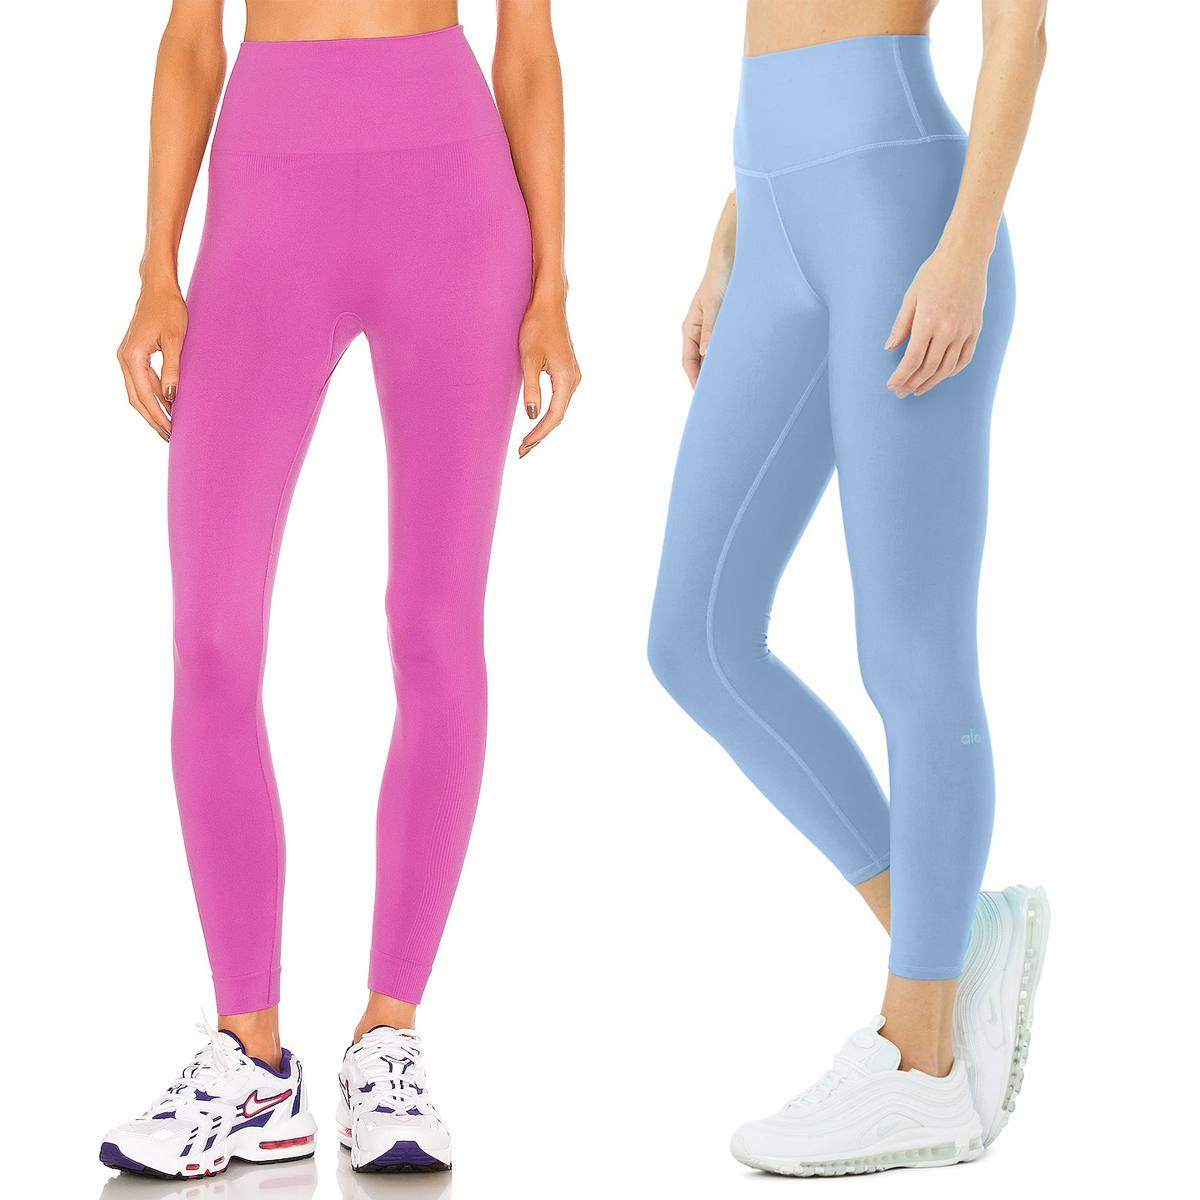 Forget cheap leggings under $10: 10 Reasons Why You No Longer Need It by  i7opdgm376 - Issuu